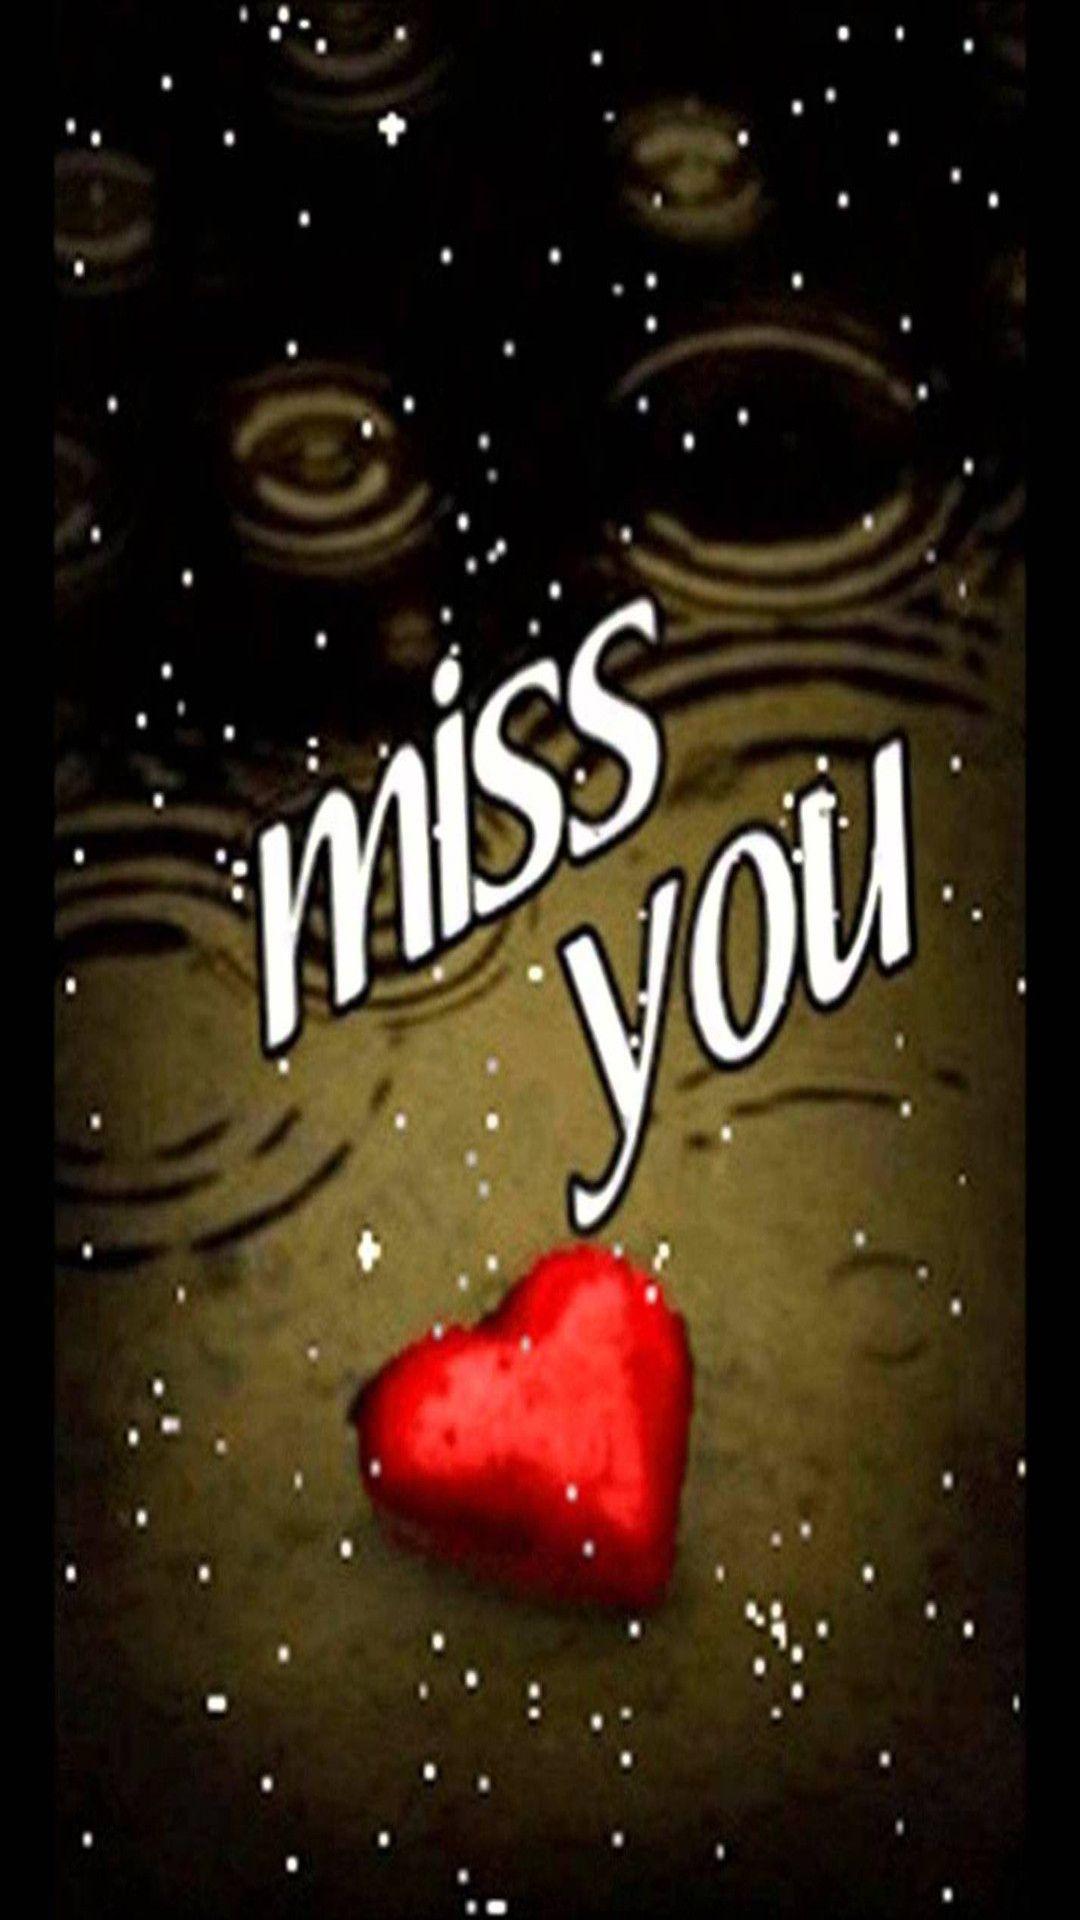 Miss You So Much With Heart iPhone 6 Full HD Wallpaper IPhone